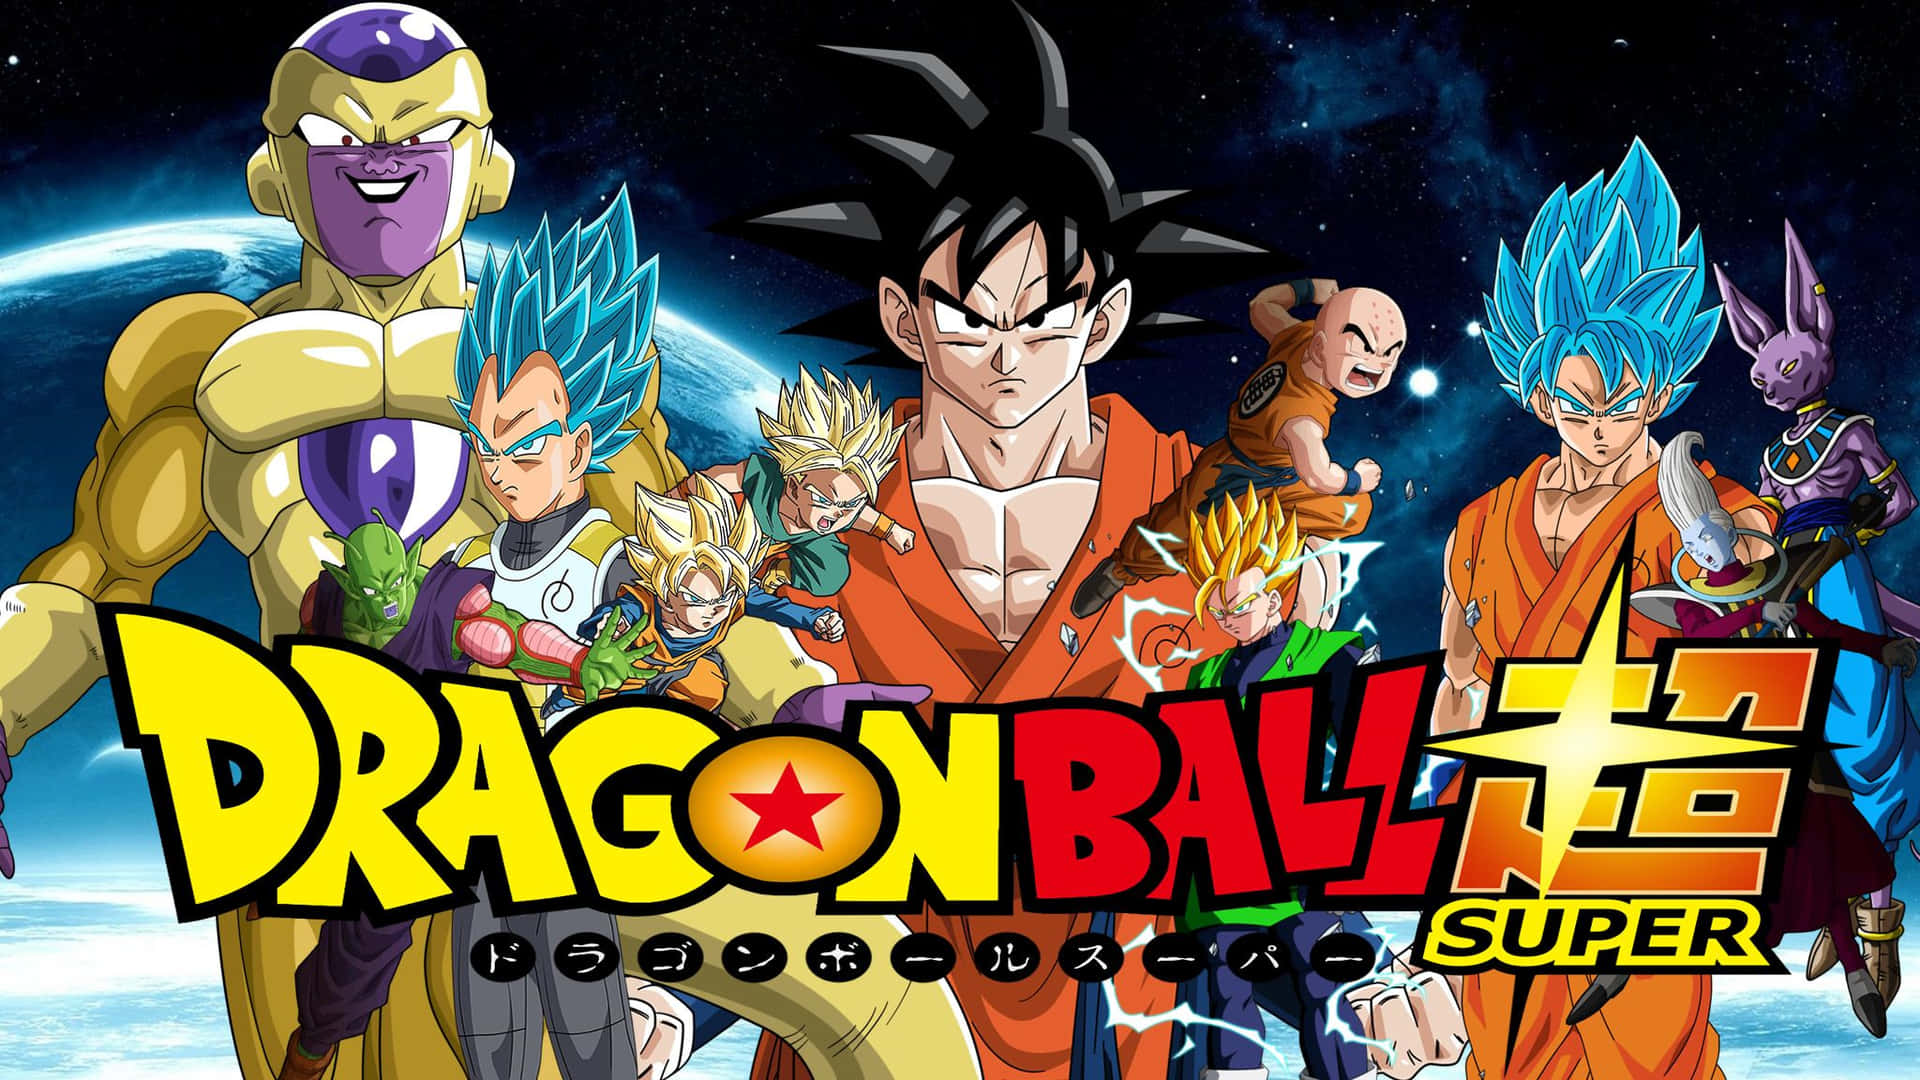 "The colorful and exciting world of Super Dragon Ball" Wallpaper